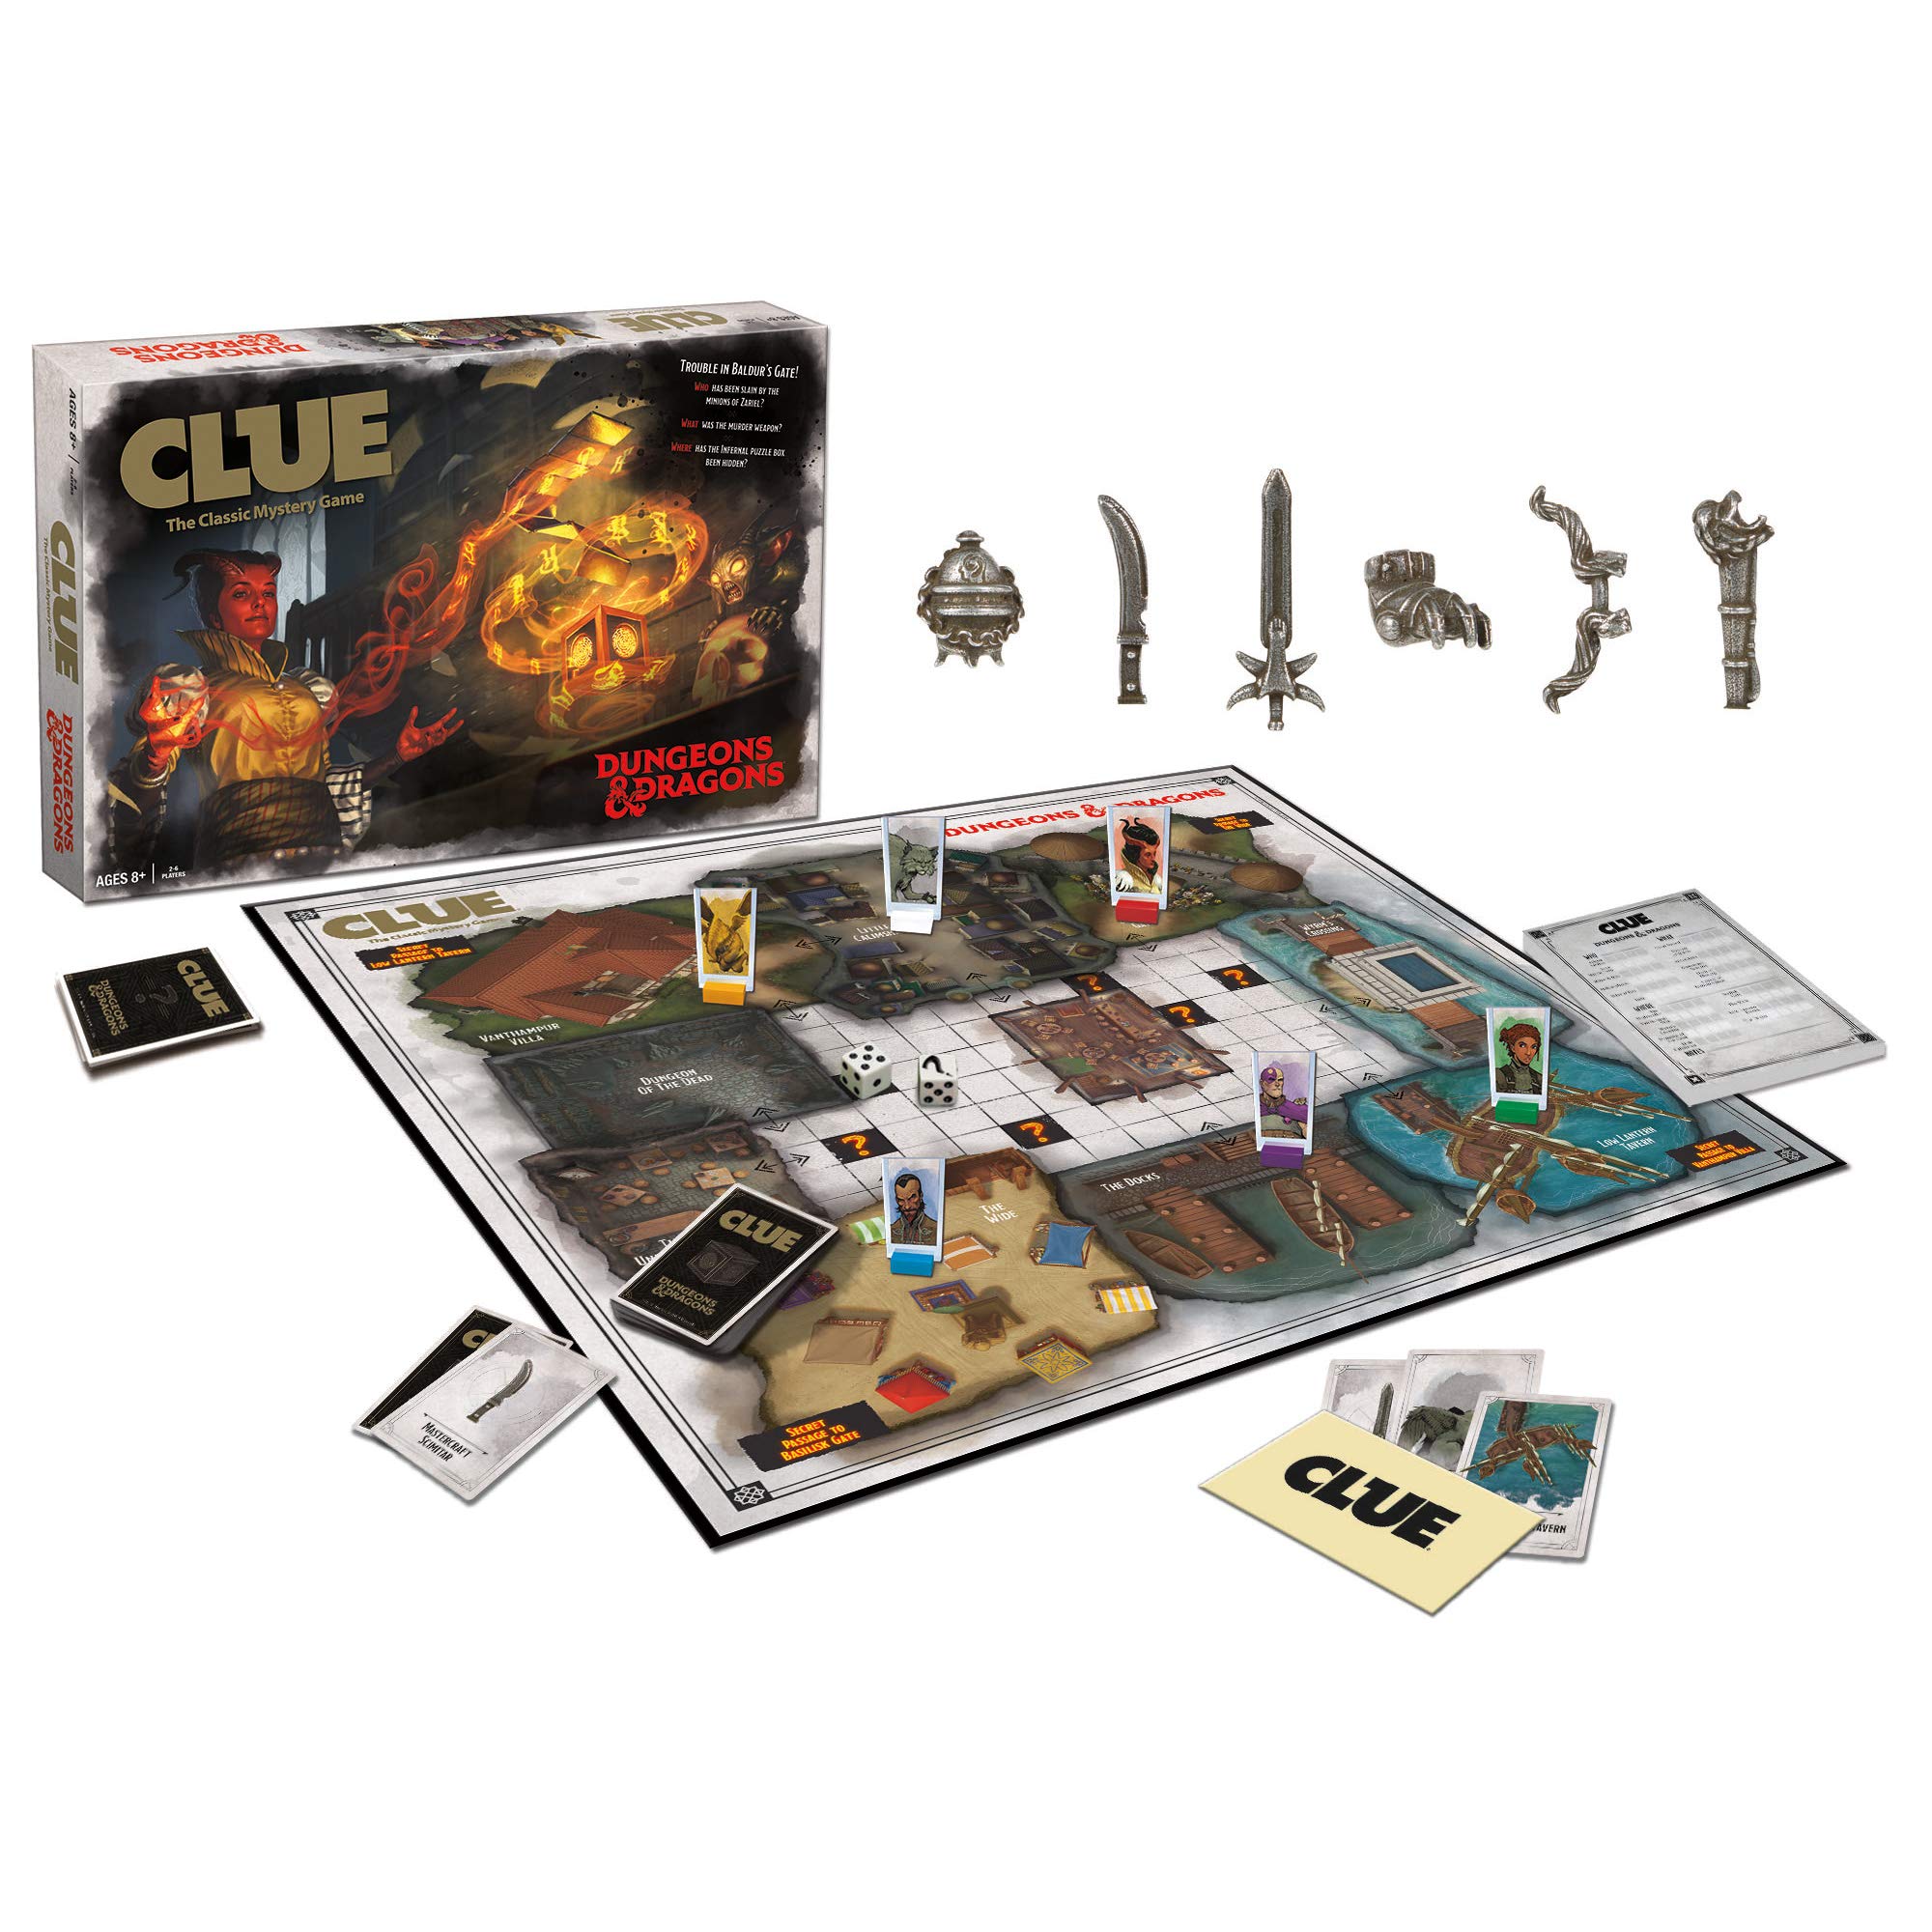 Clue - Dungeons and Dragons (C3)